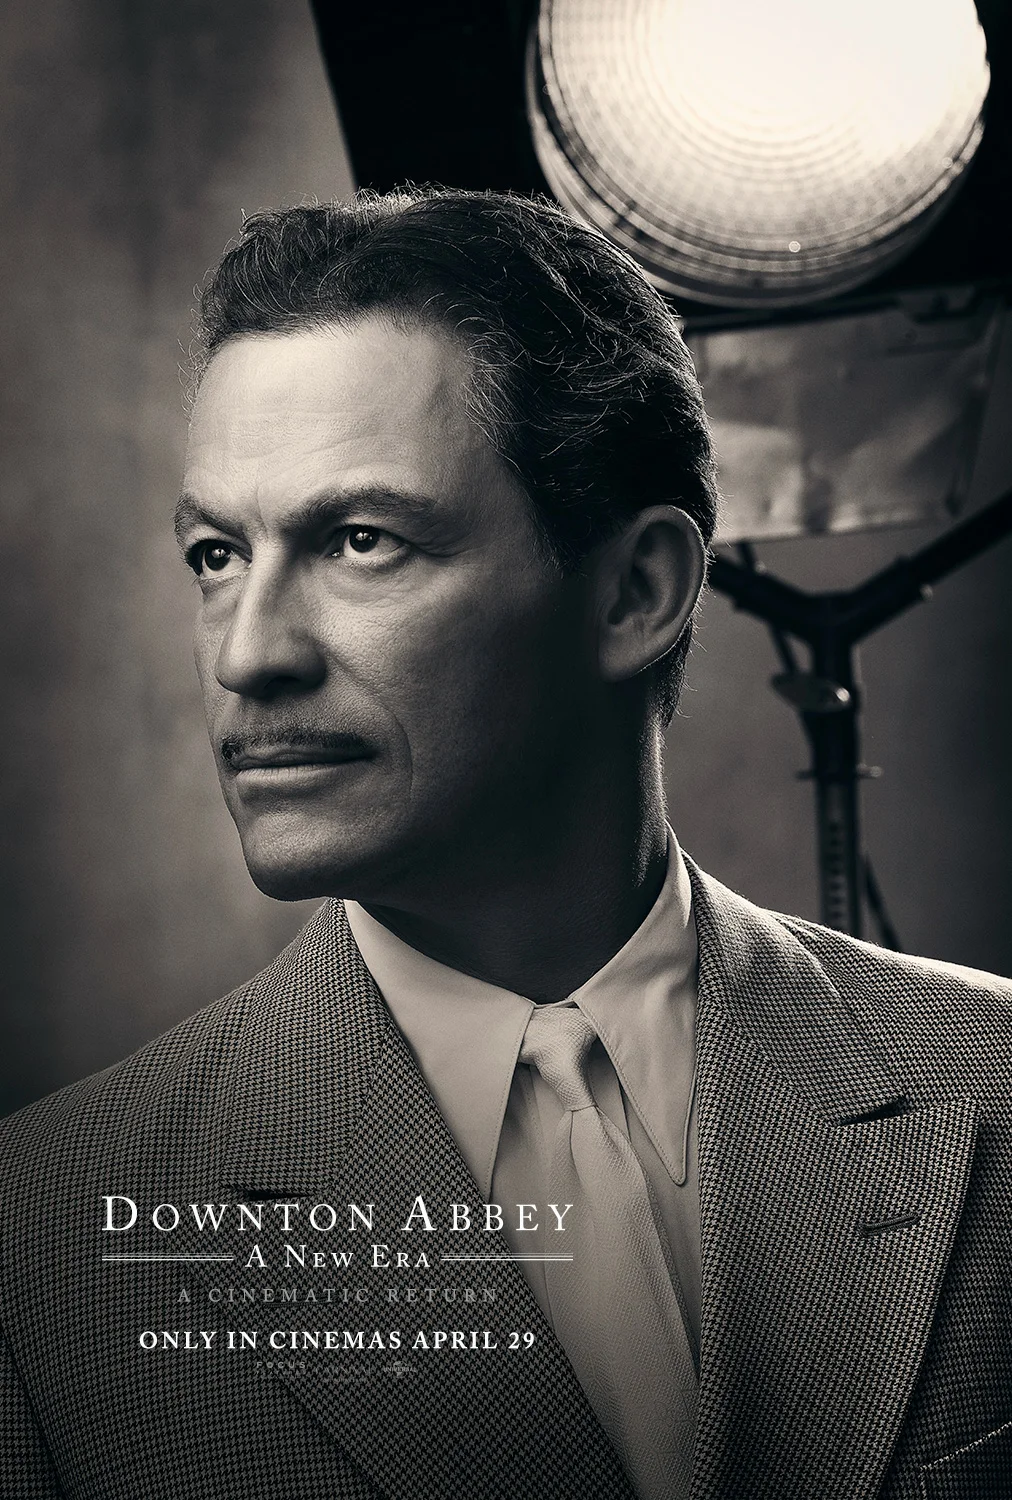 downton-abbey-a-new-era-released-character-posters-multiple-main-actors-appear-10